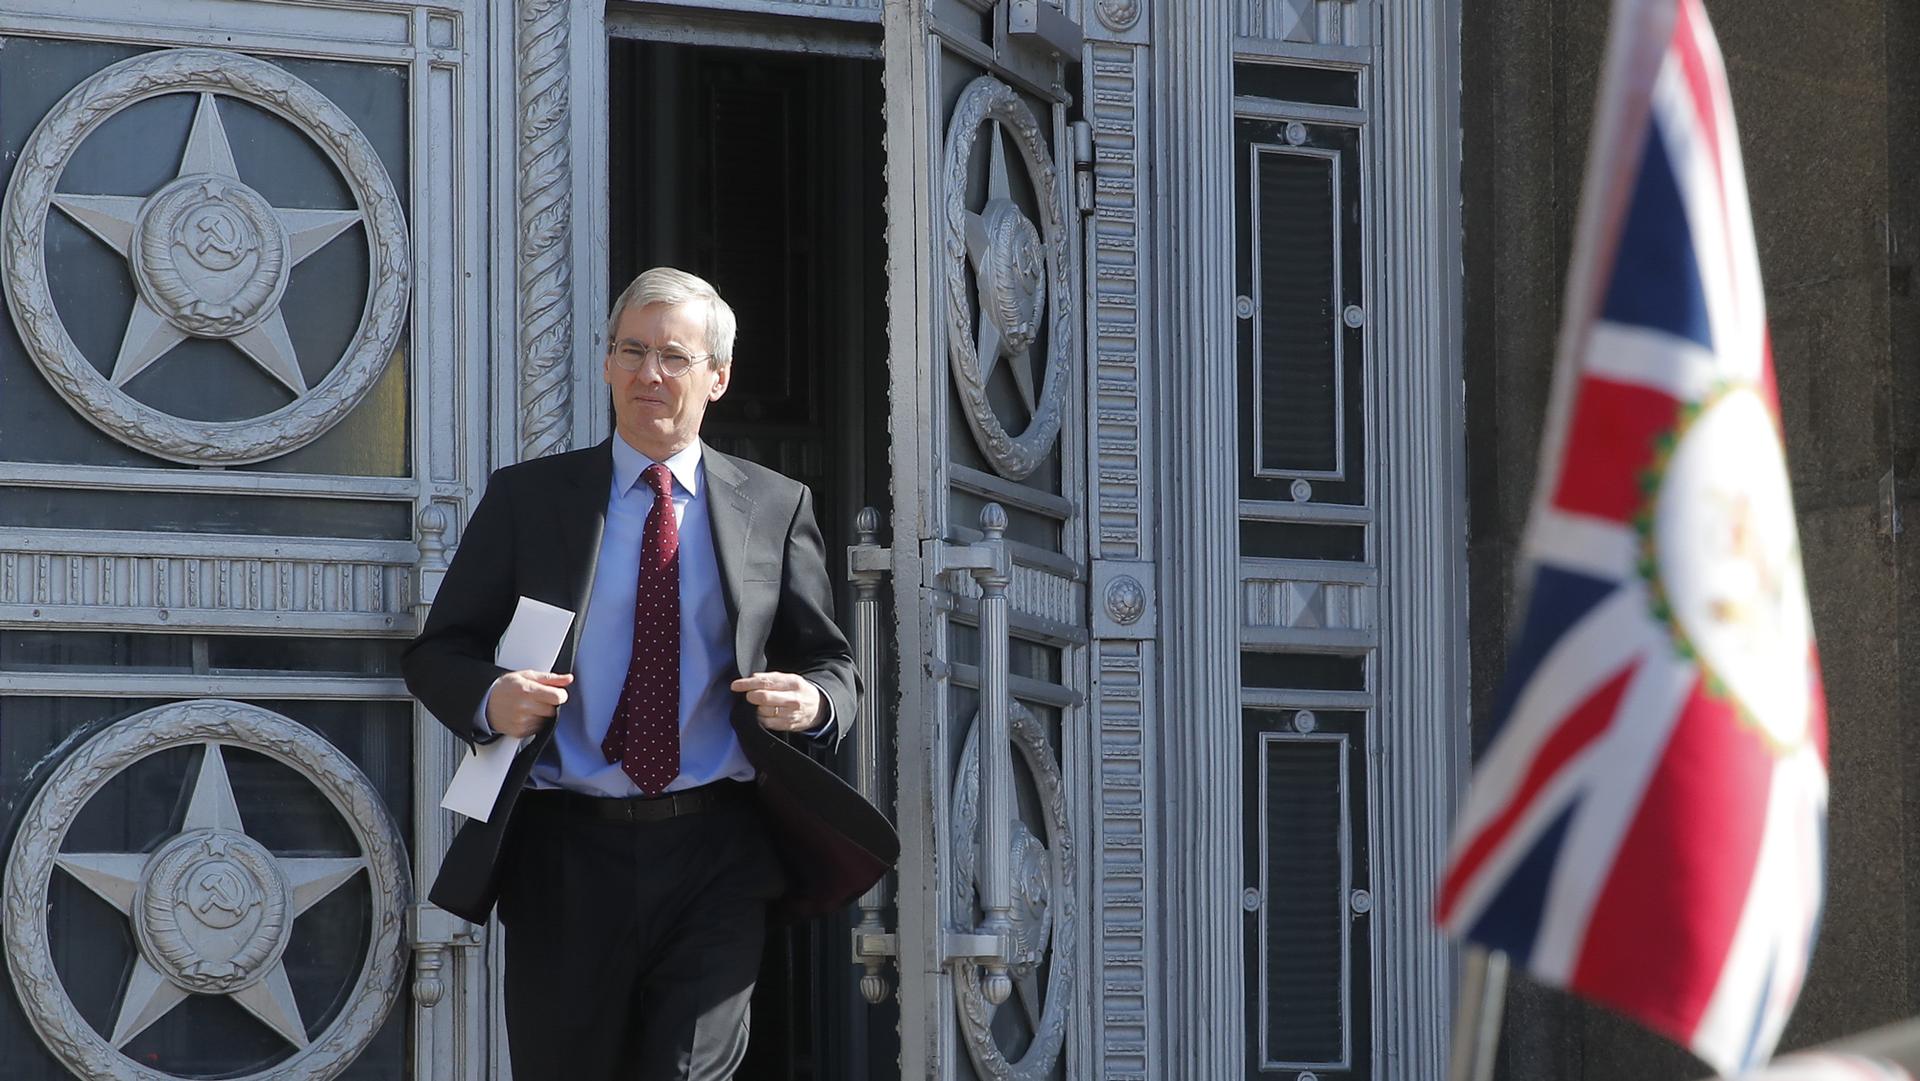 British Ambassador to Russia, Laurie Bristow, is seen walking out of the Russian foreign ministry building in Moscow.